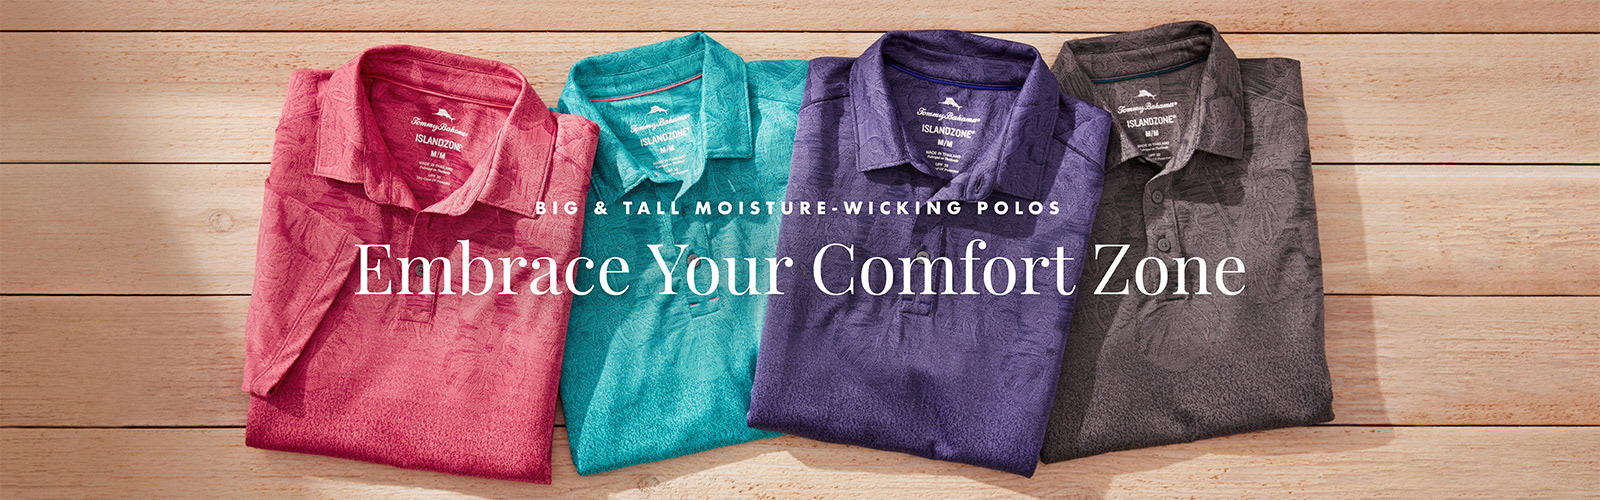 Big & Tall Moisture-Wicking Polos - Embrace Your Comfort Zone